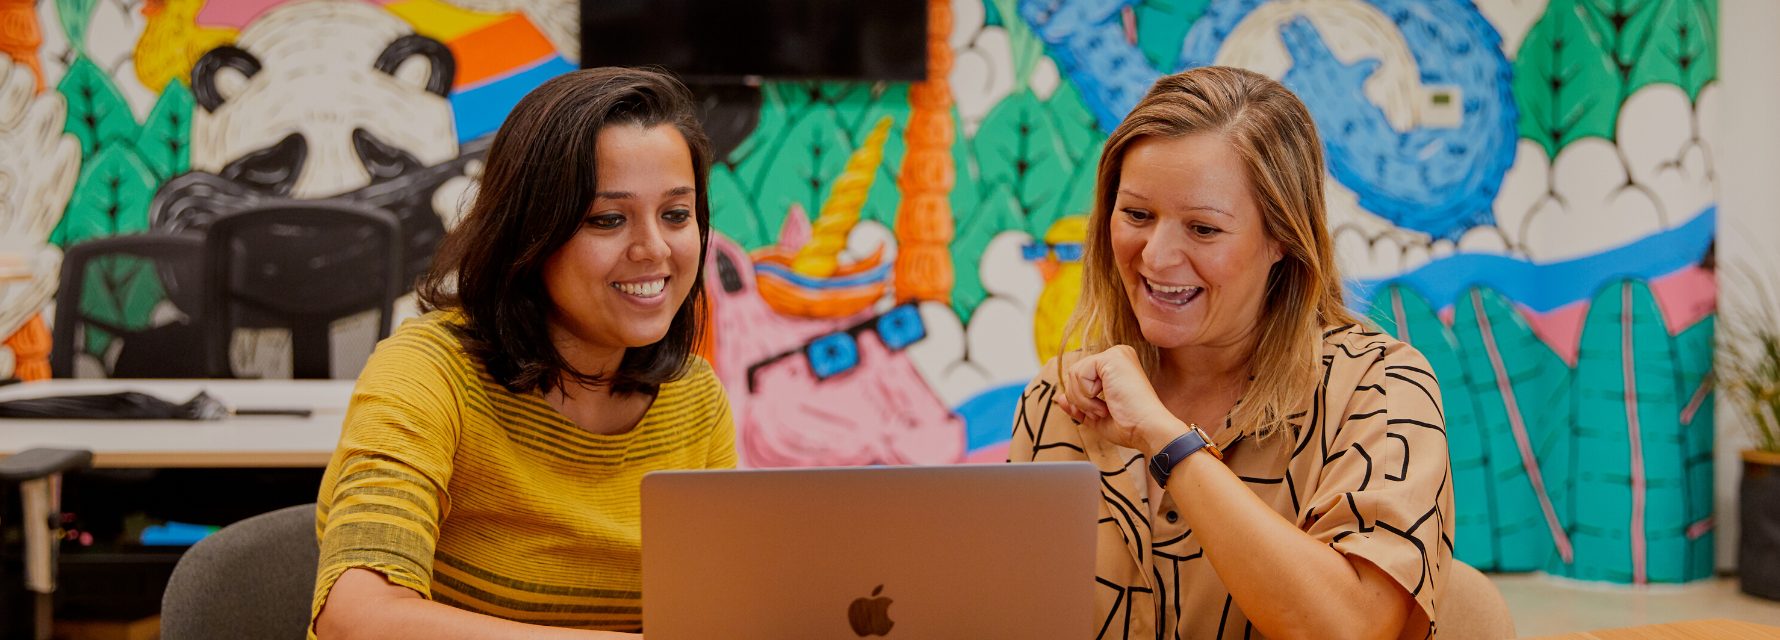 Hear from Canva’s freshest bunch of grads on their experience so far at Canva and tips to nailing the interview process